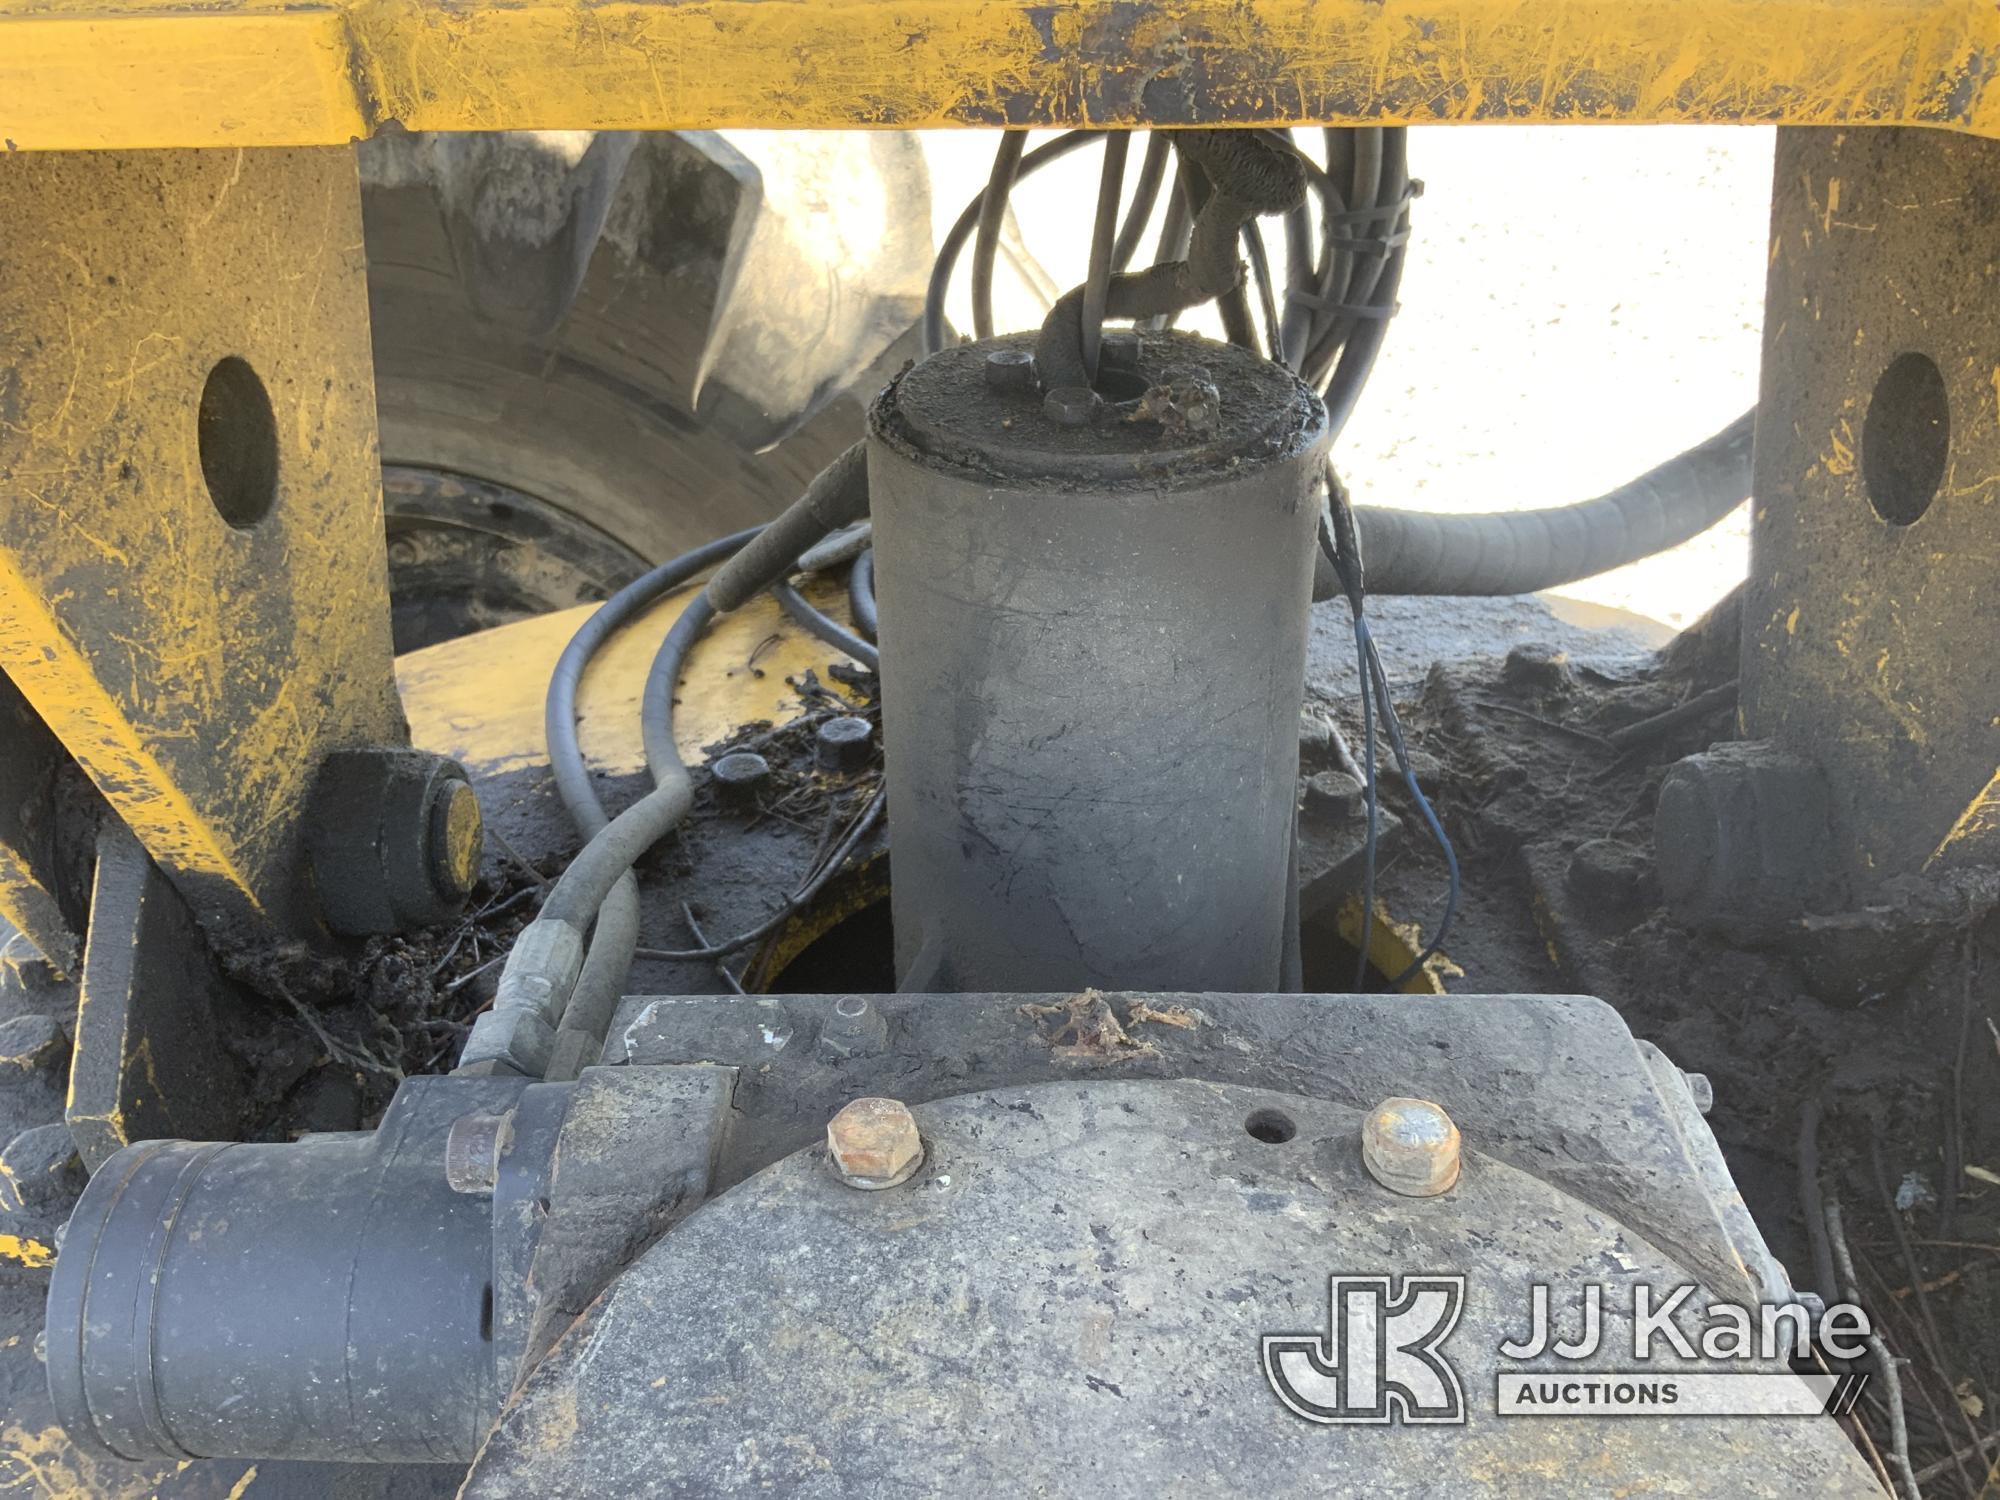 (Hawk Point, MO) 2010 Jarraff 4 Wheel Drive Articulating Rubber Tired Tree Saw Runs, Moves, Operates